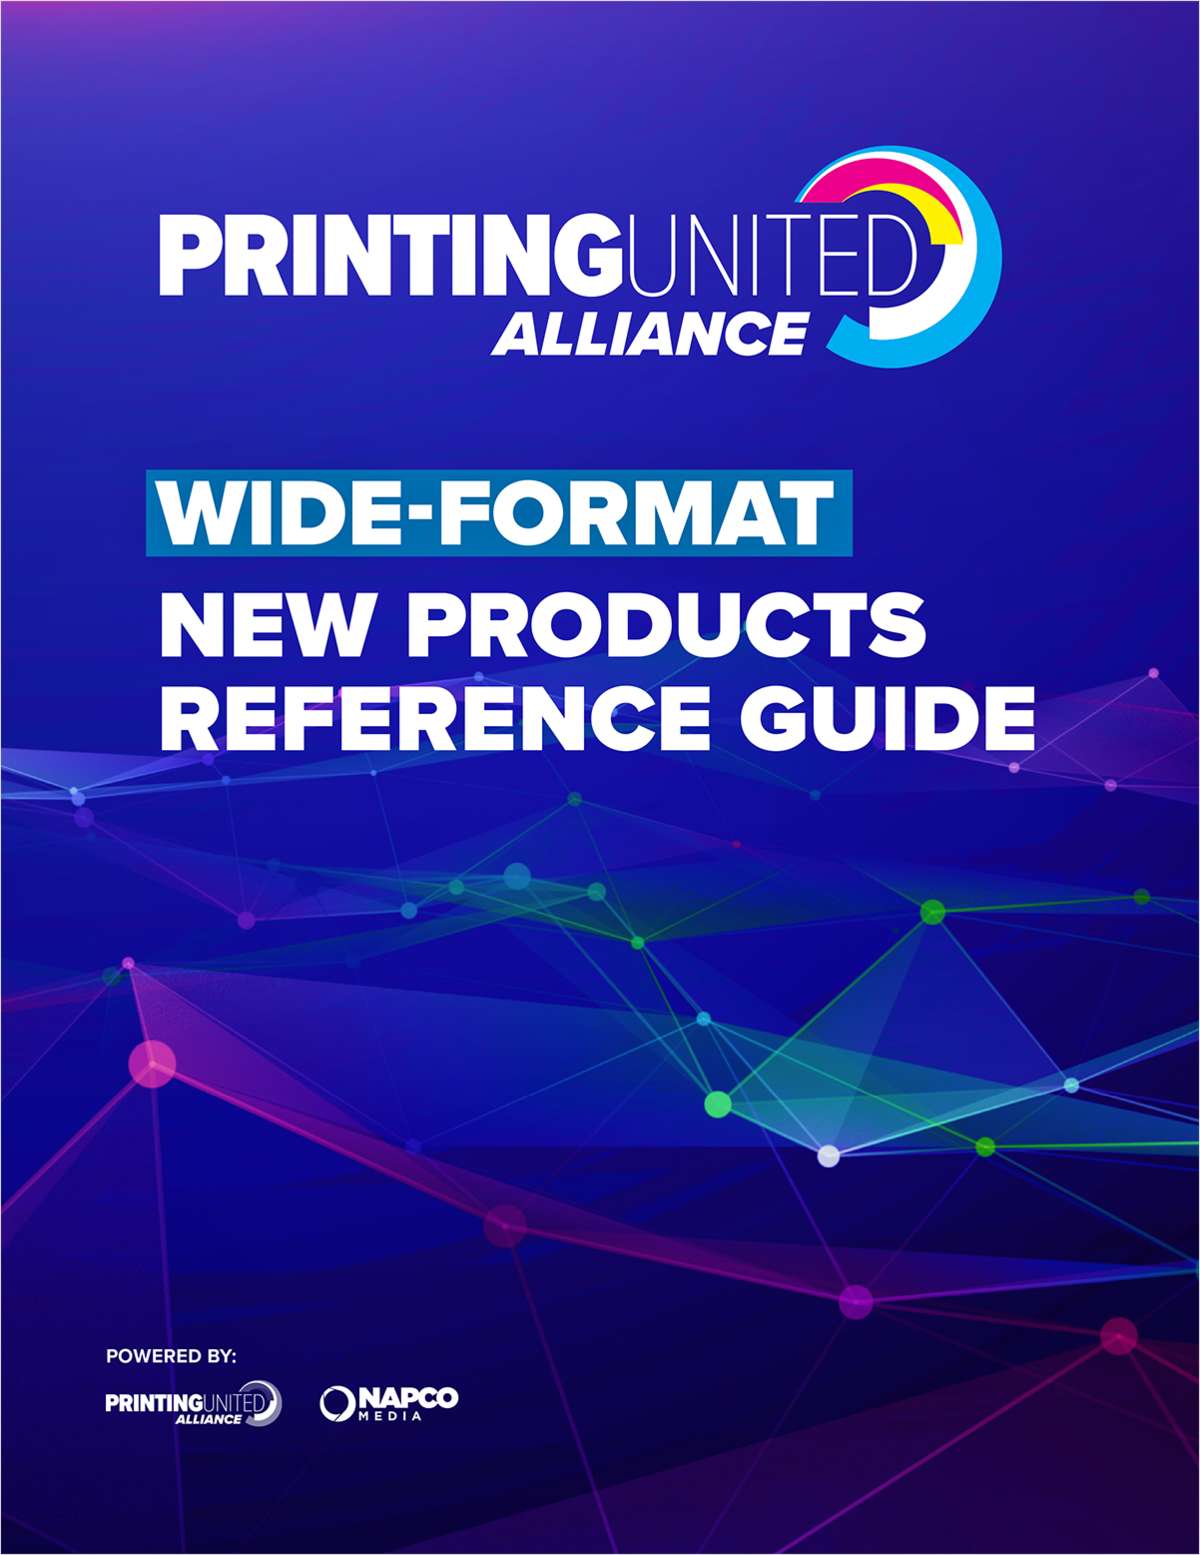 Wide-format New Products Reference Guide